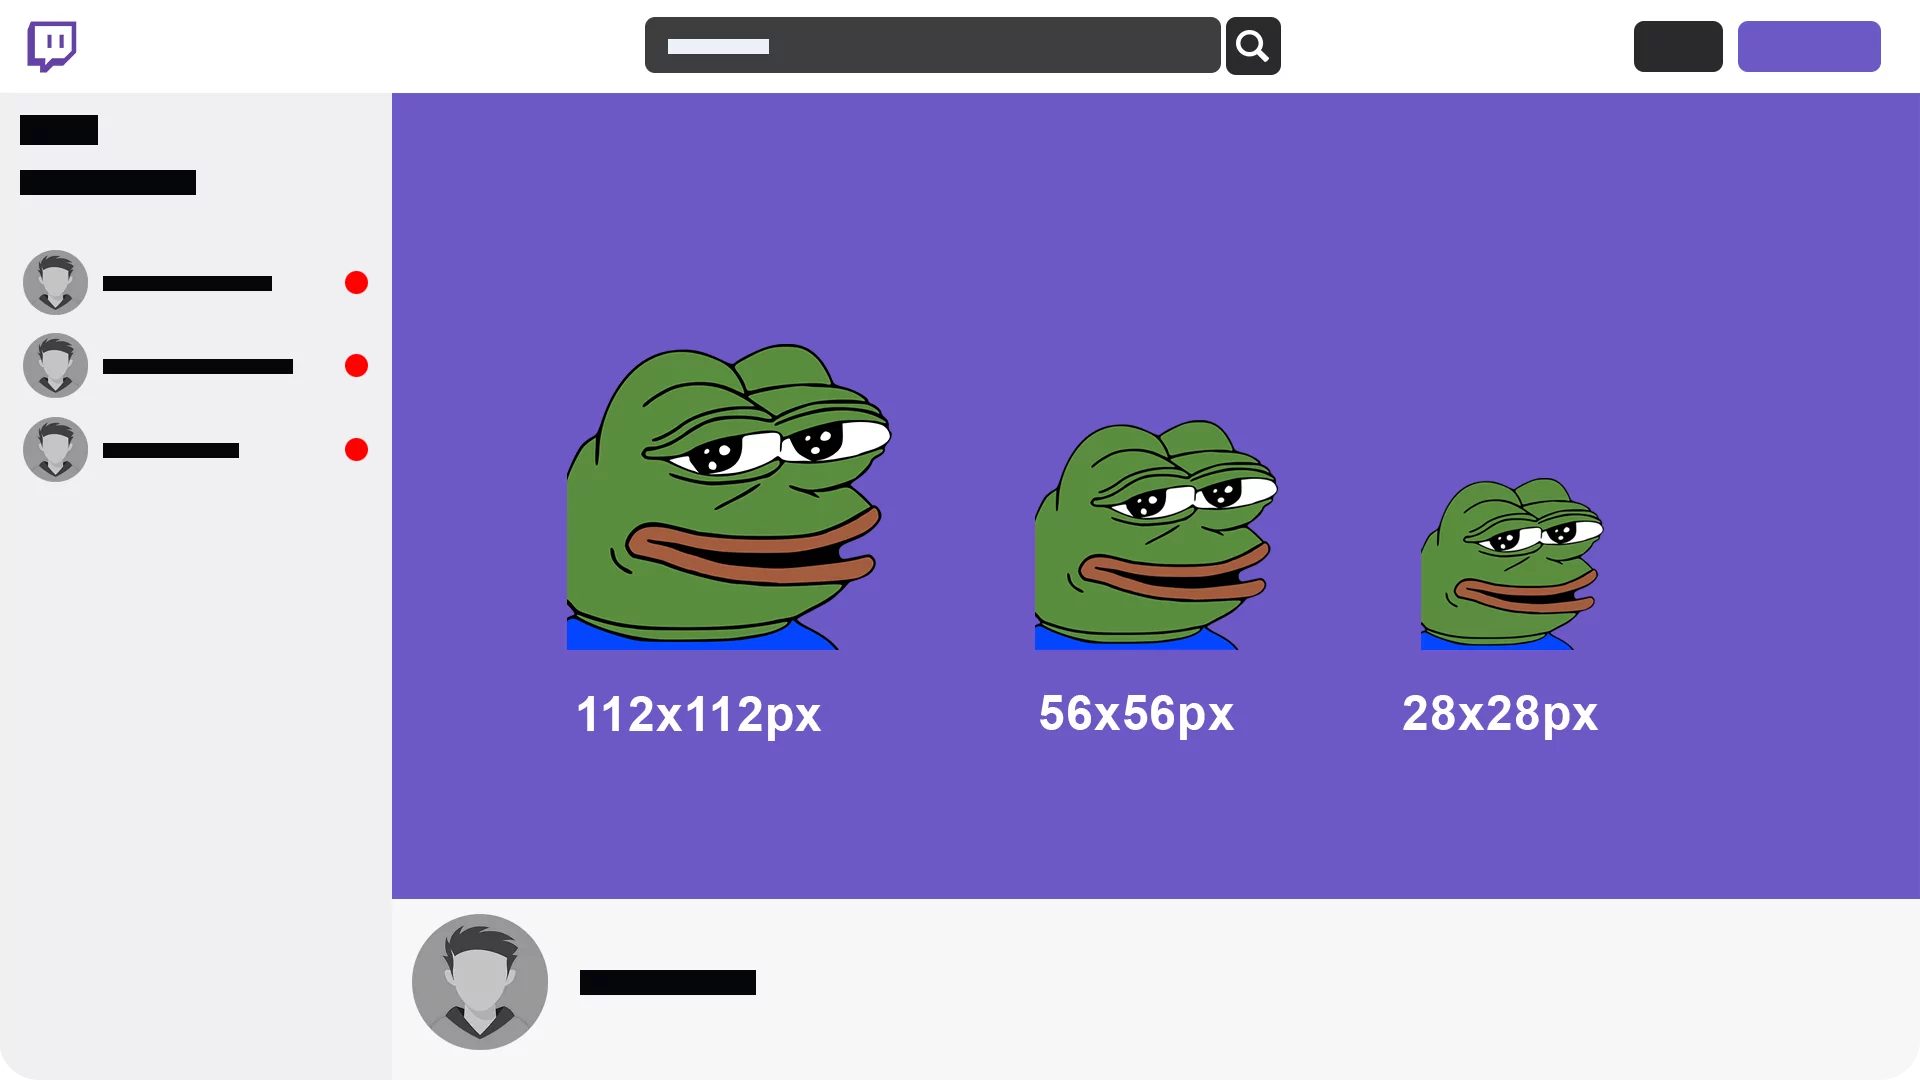 The largest Twitch emote size is 112x112px